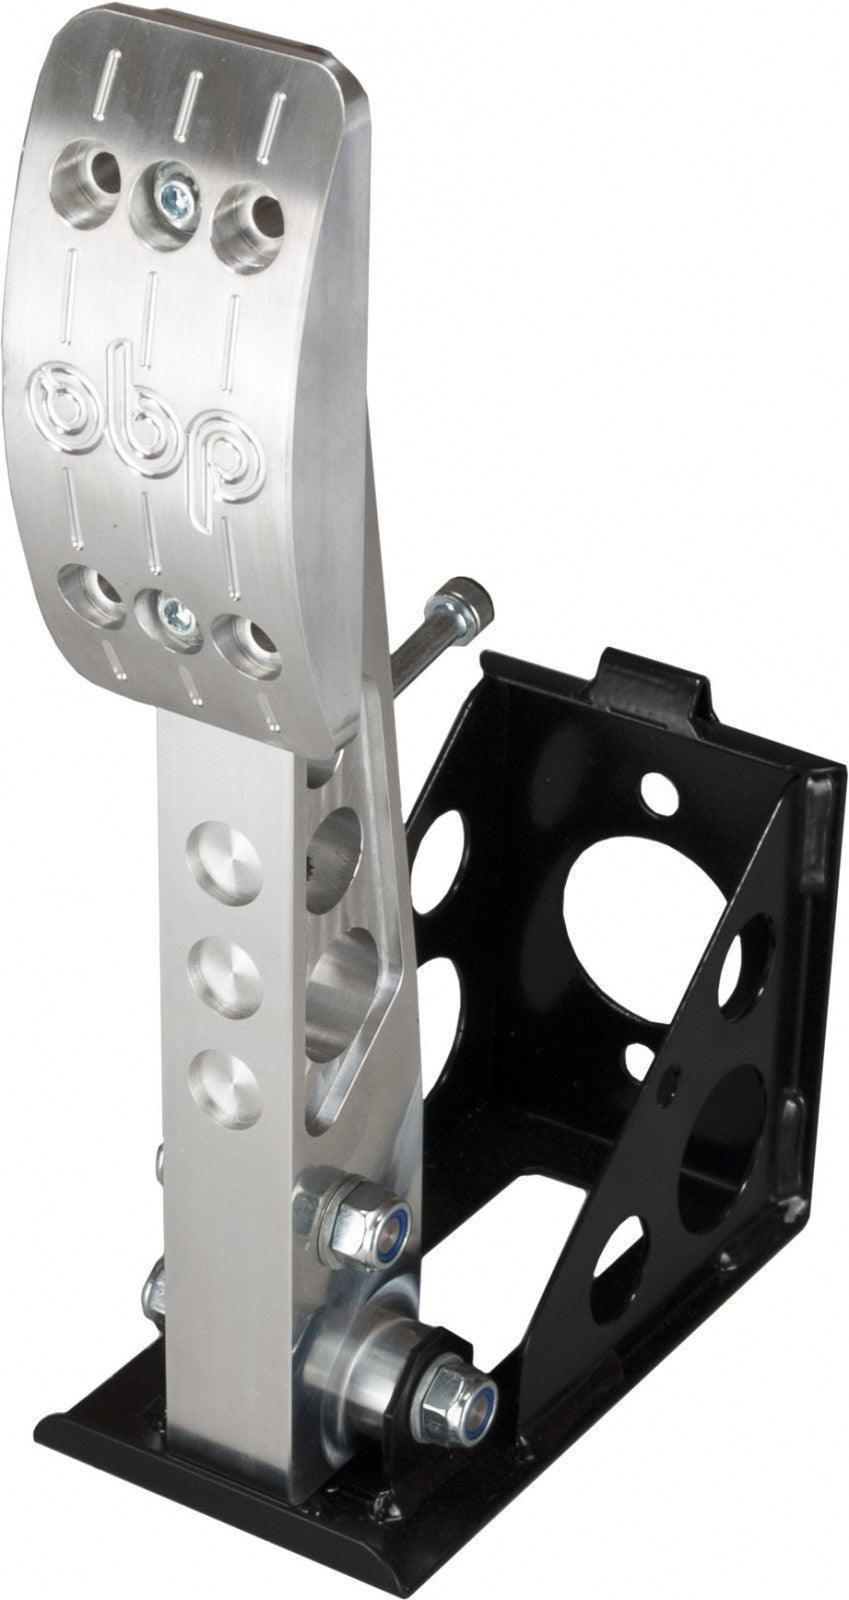 obp Motorsport Pro-Race V2 Floor Mounted Clutch Pedal Unit - Attacking the Clock Racing